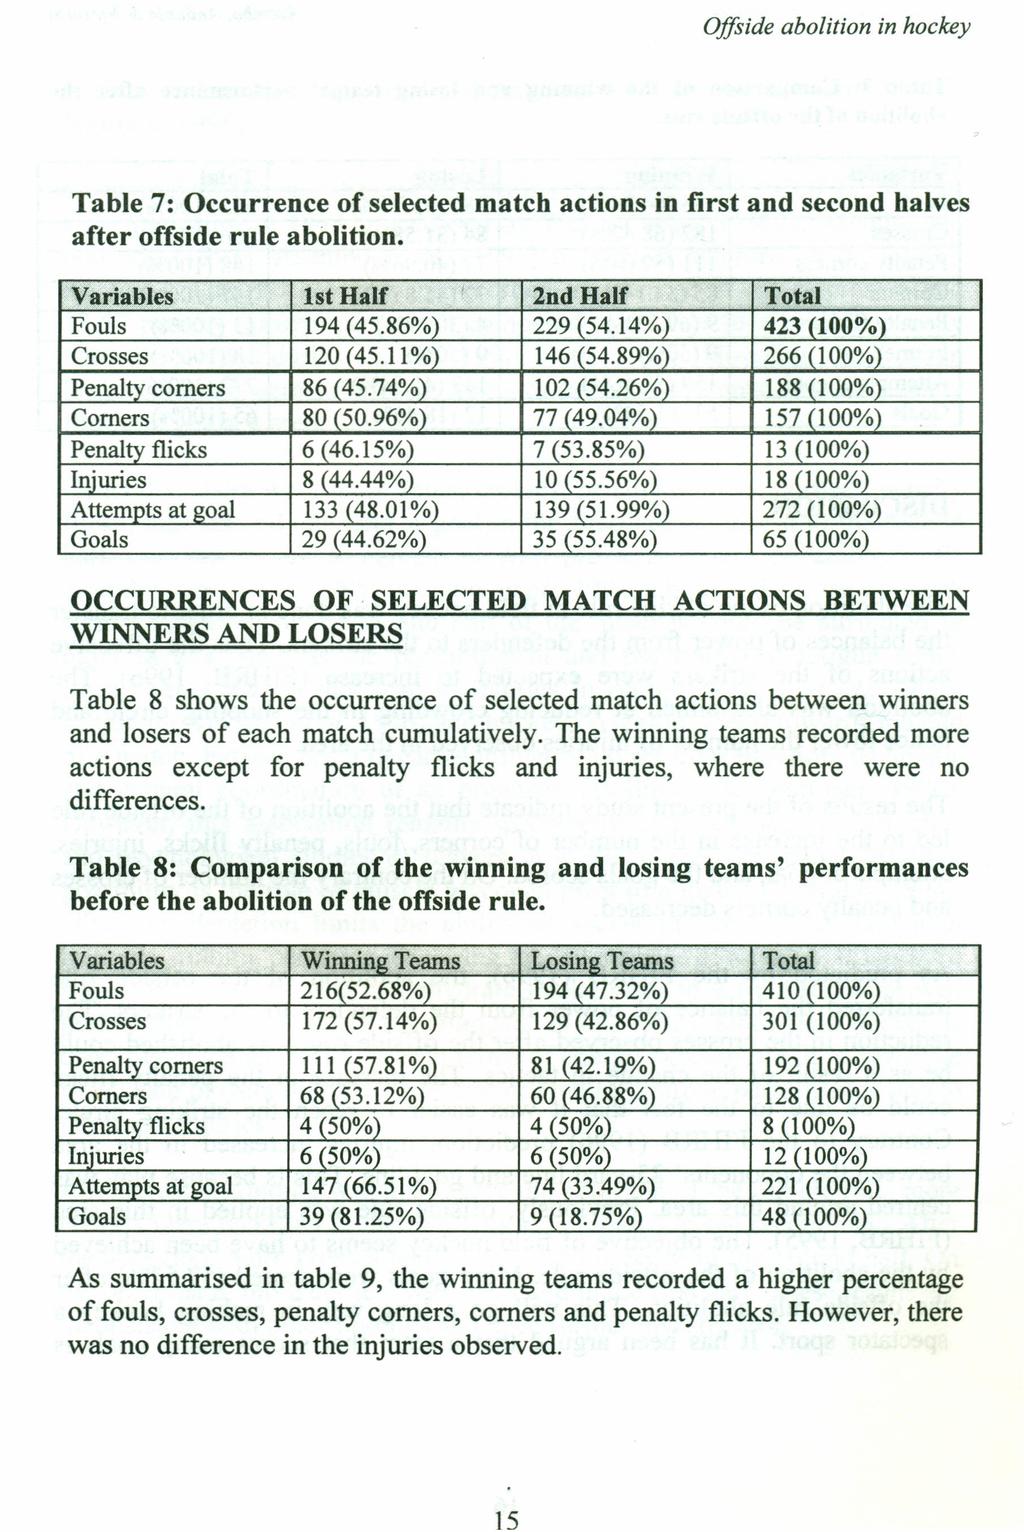 15 Offside abolition in hockey Table 7: Occurrence of selected match actions in first and second halves after offside rule abolition. Variables 1st Half, 2nd Half Total Fouls 194 (45.86%) 229 (54.